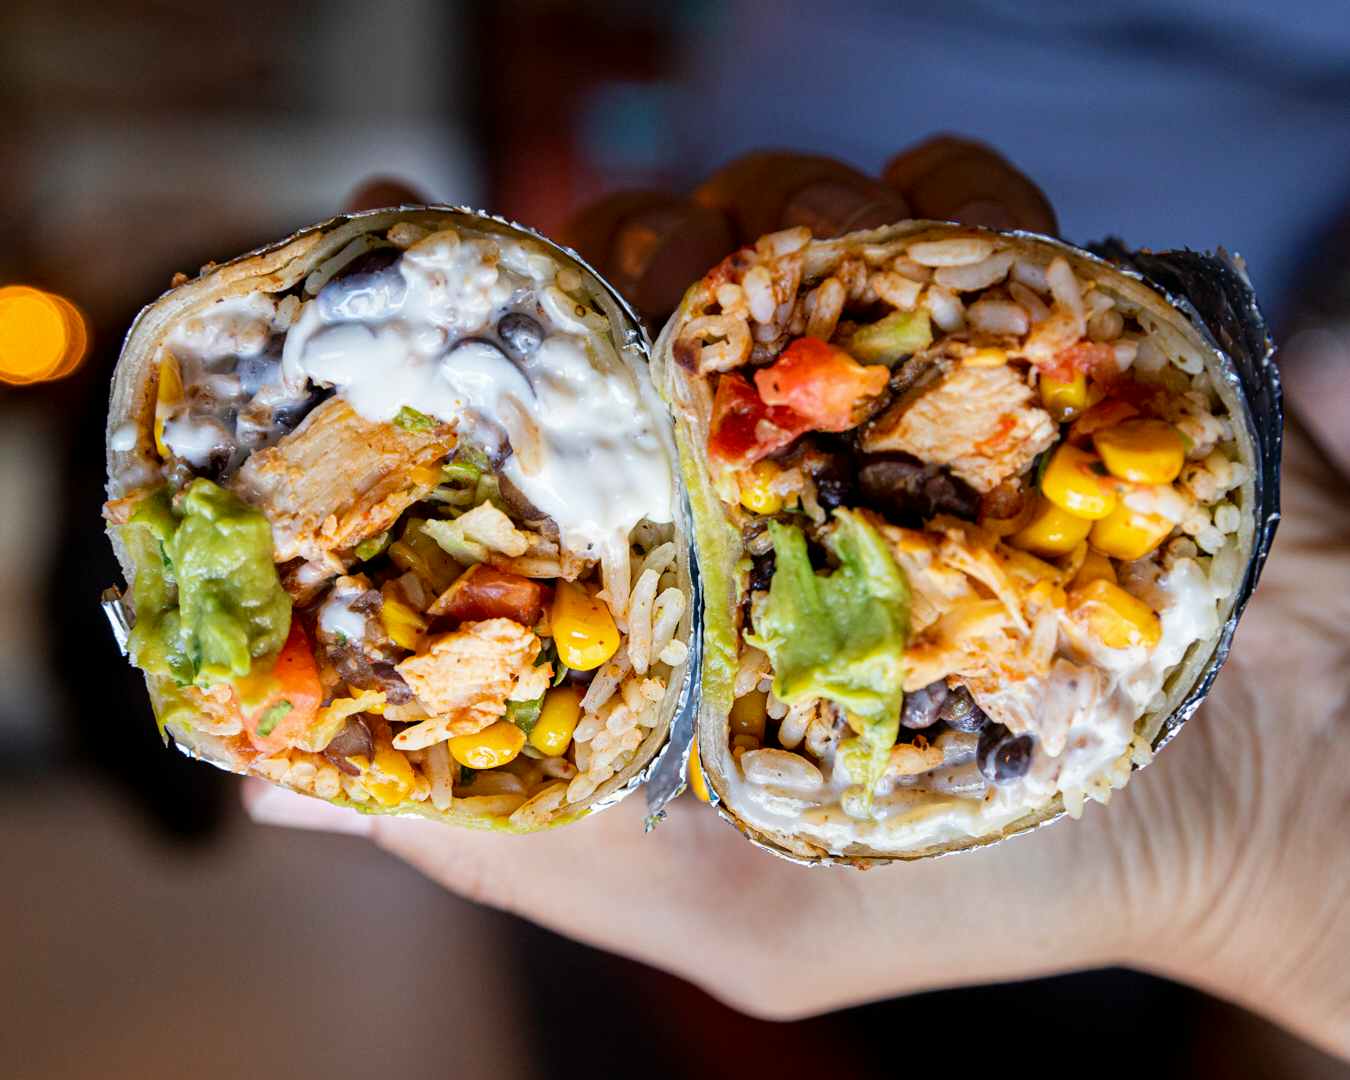 A person's hand holding up two halves of a burrito, showing the inside. The burrito is filled with meat, cheese, beans, rice, ...